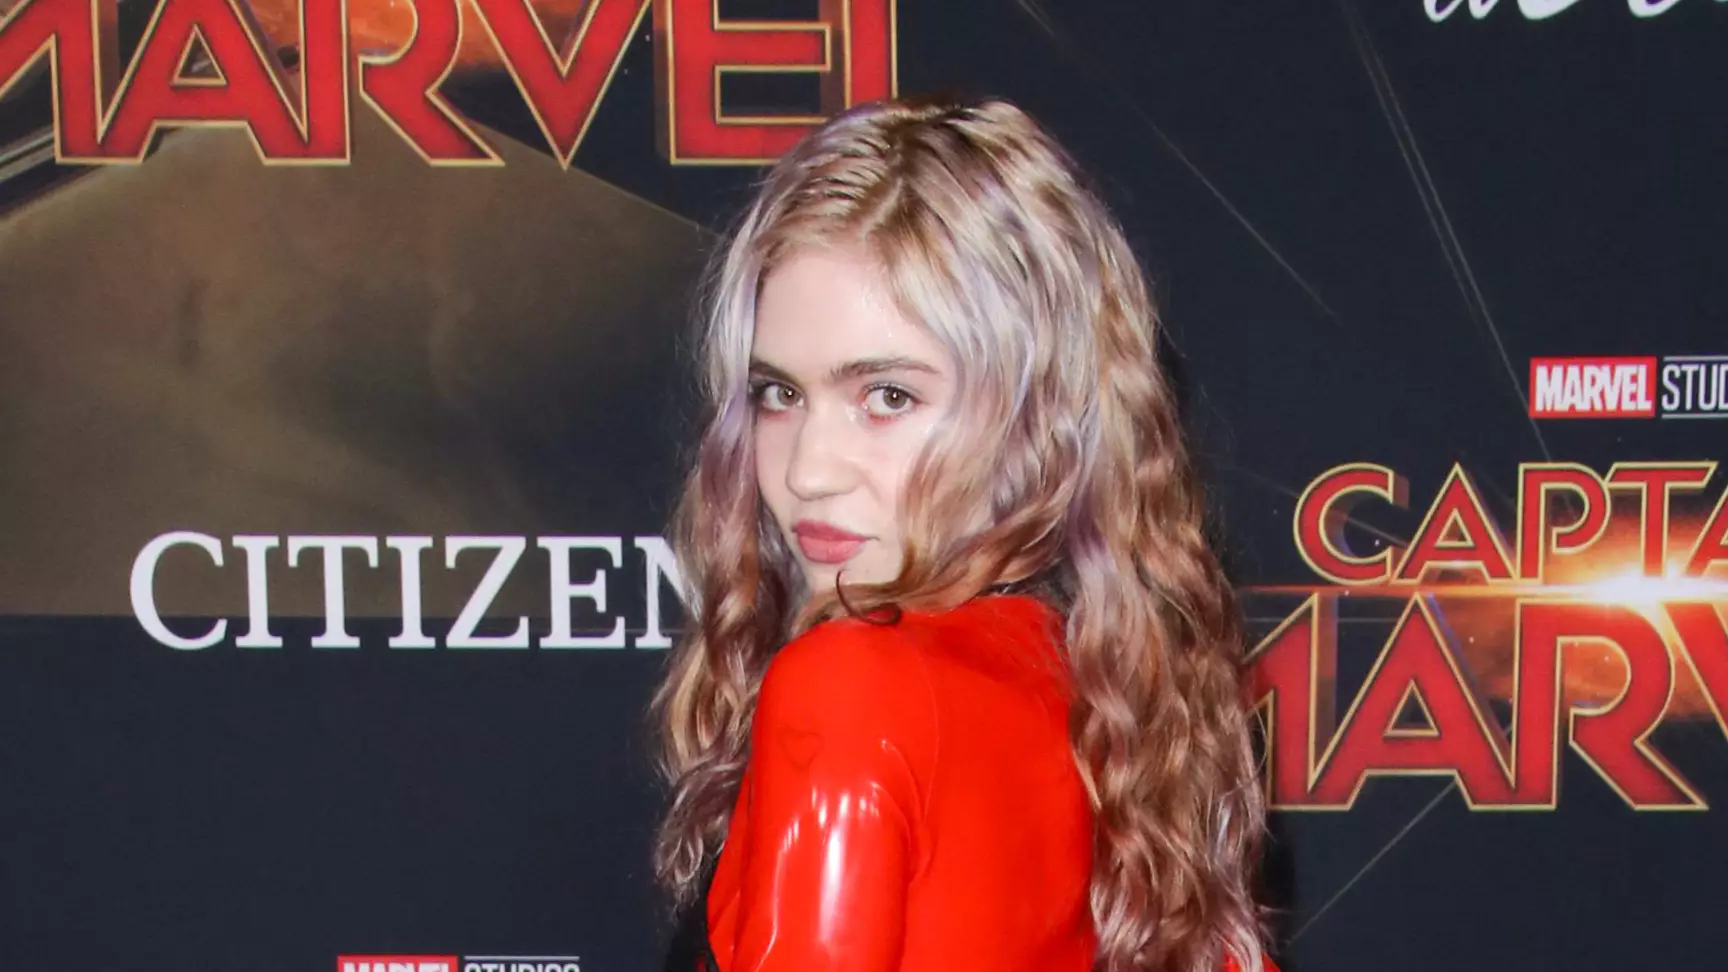 Grimes And Lil Uzi Vert Plan To Get ‘Brain Chips’ Together